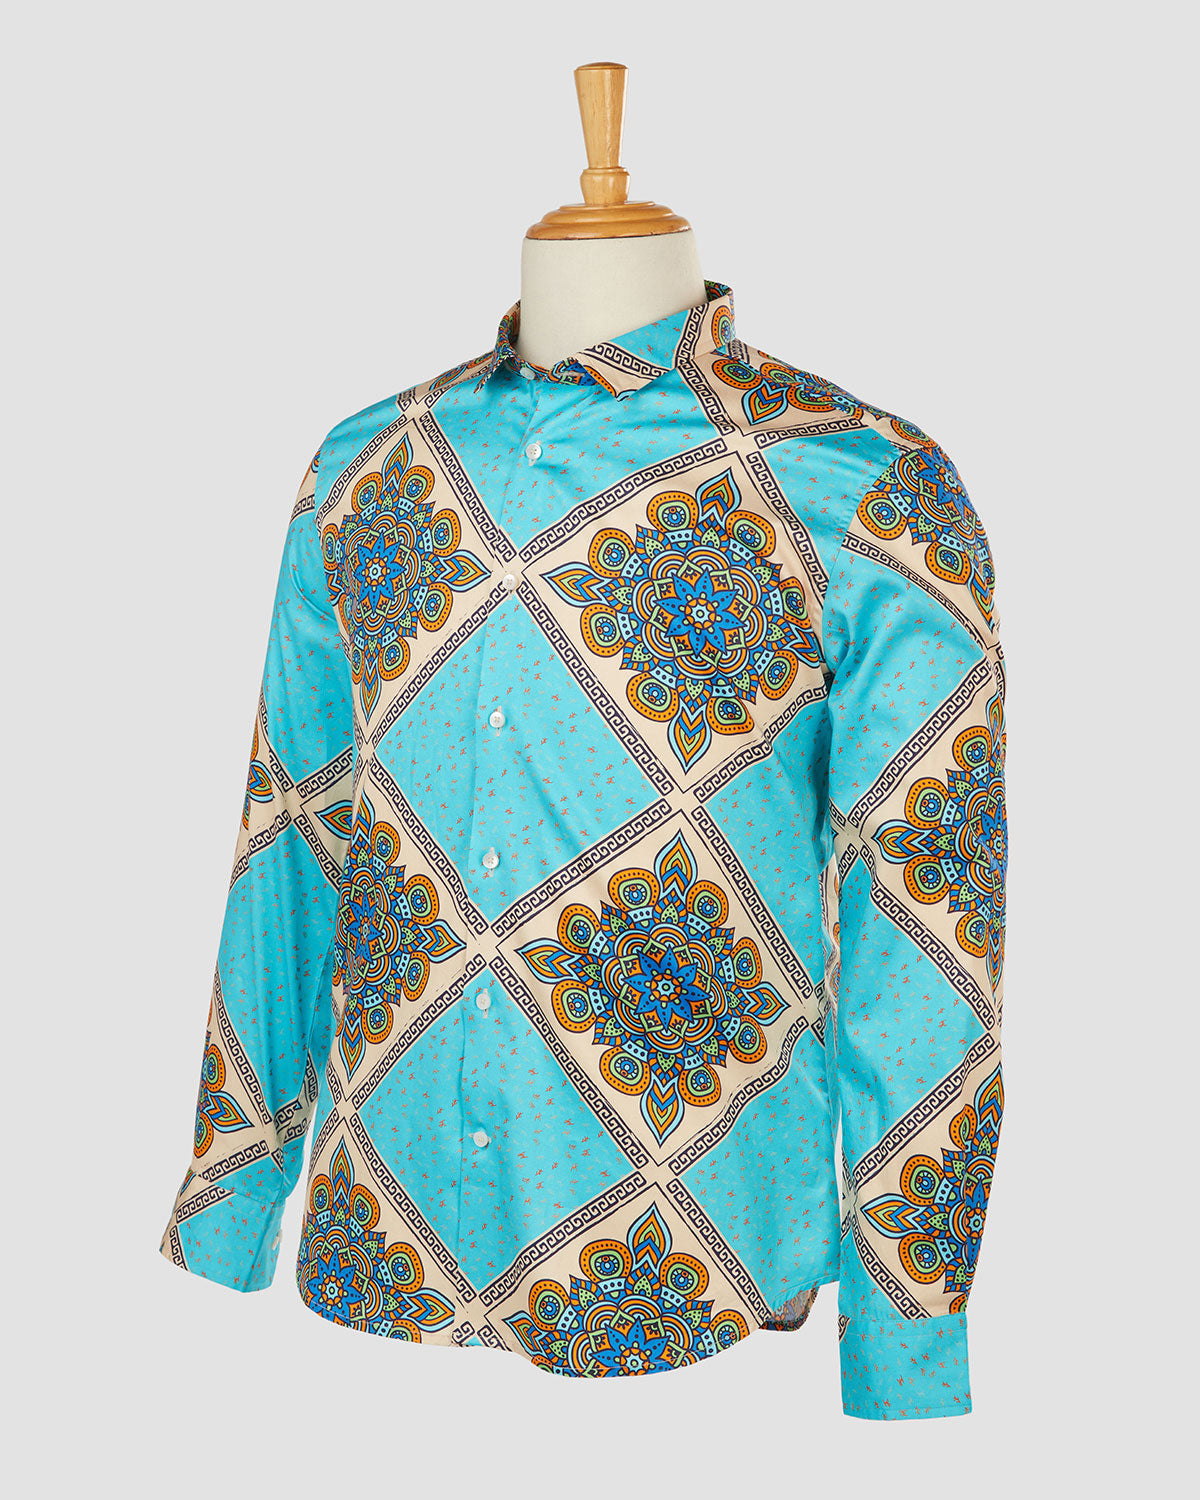 Bombay Shirt Company - Spectral Chandelier Shirt